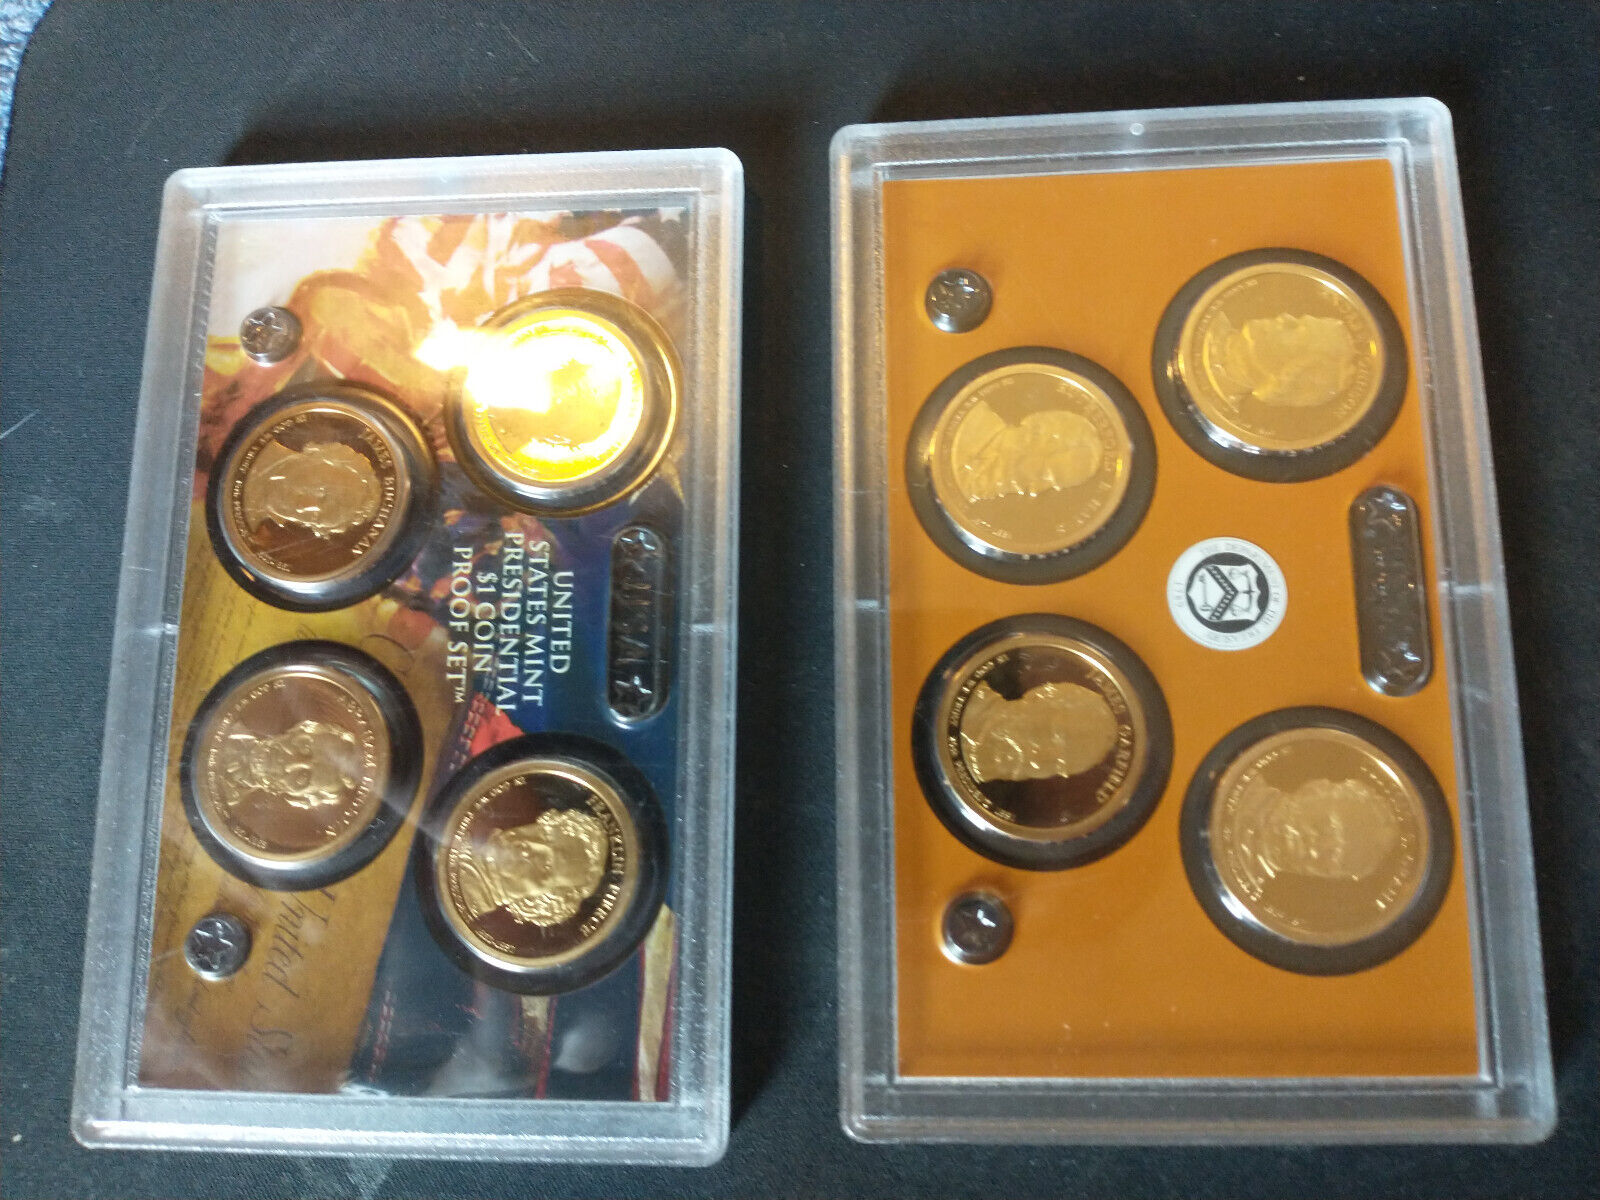 2010 & 2011 Presidential $1 coin proof sets